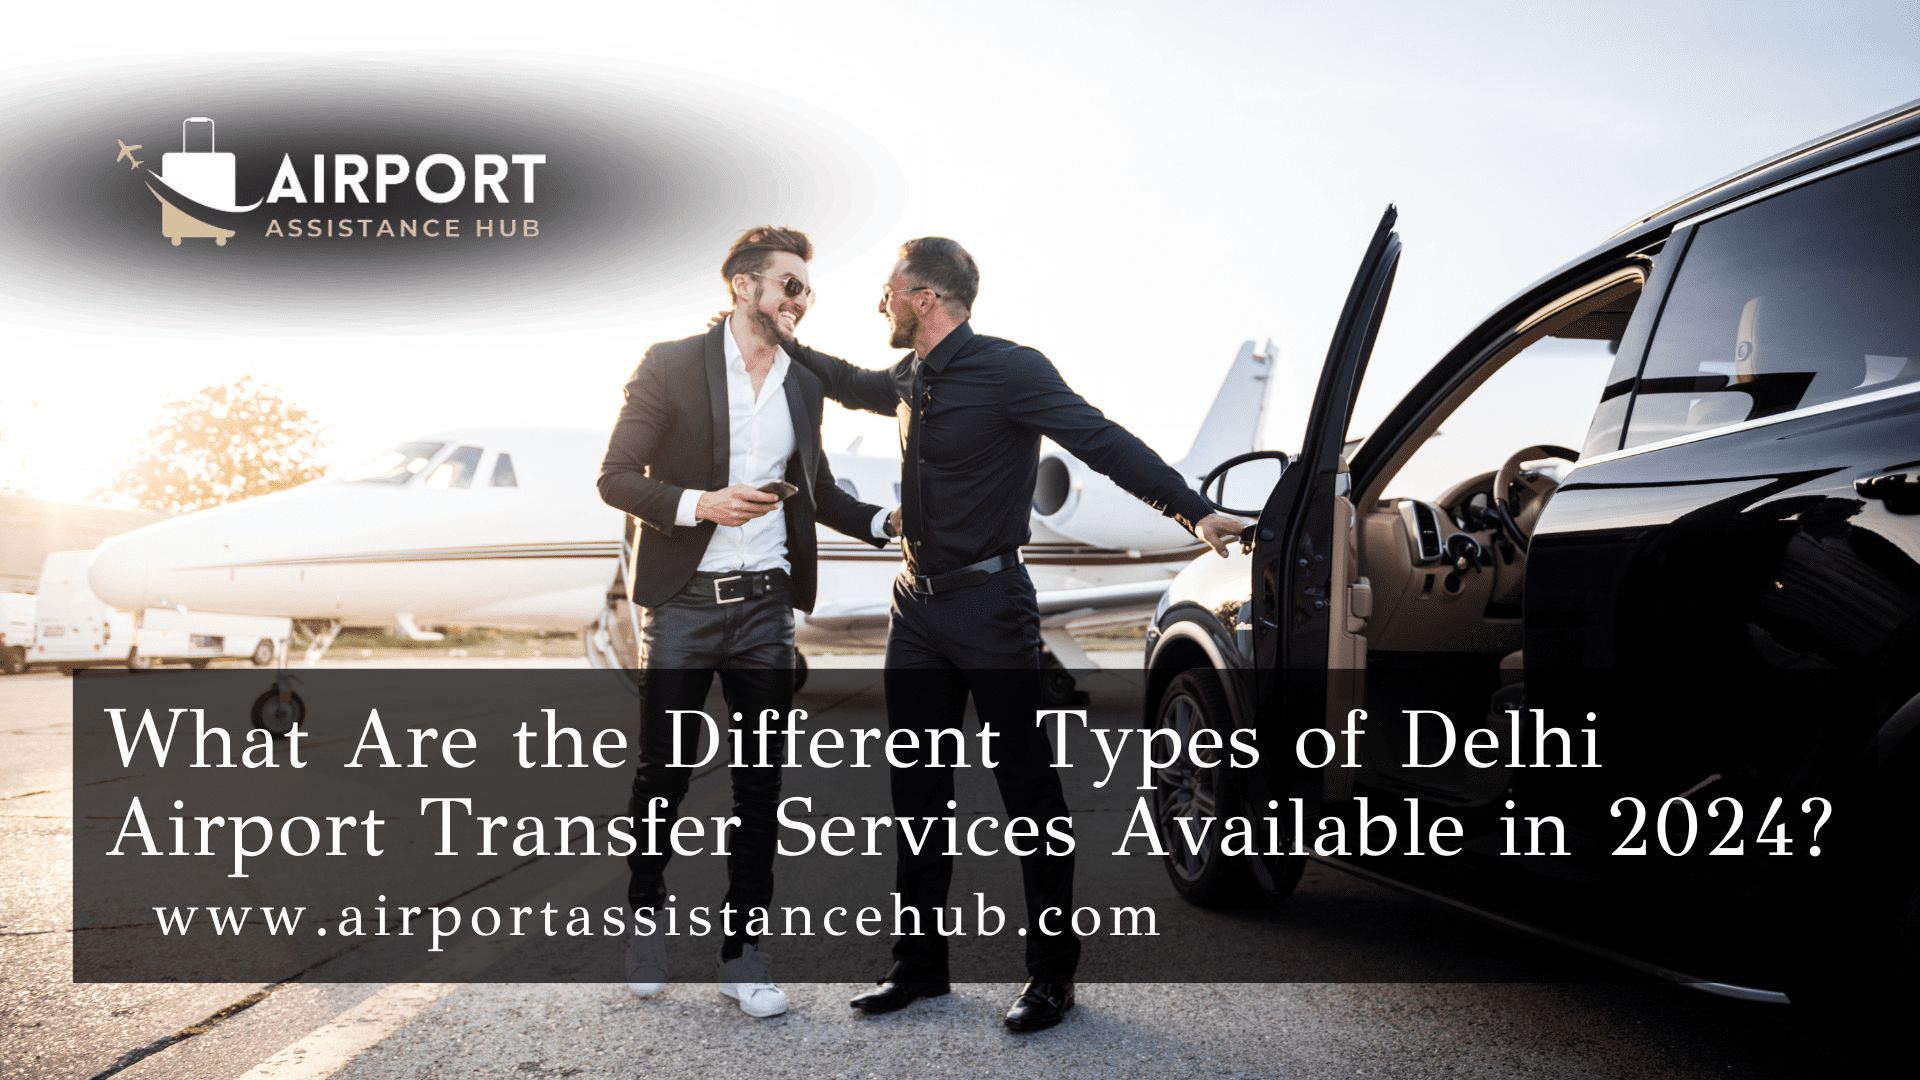 What Are the Different Types of Delhi Airport Transfer Services Available in 2024?